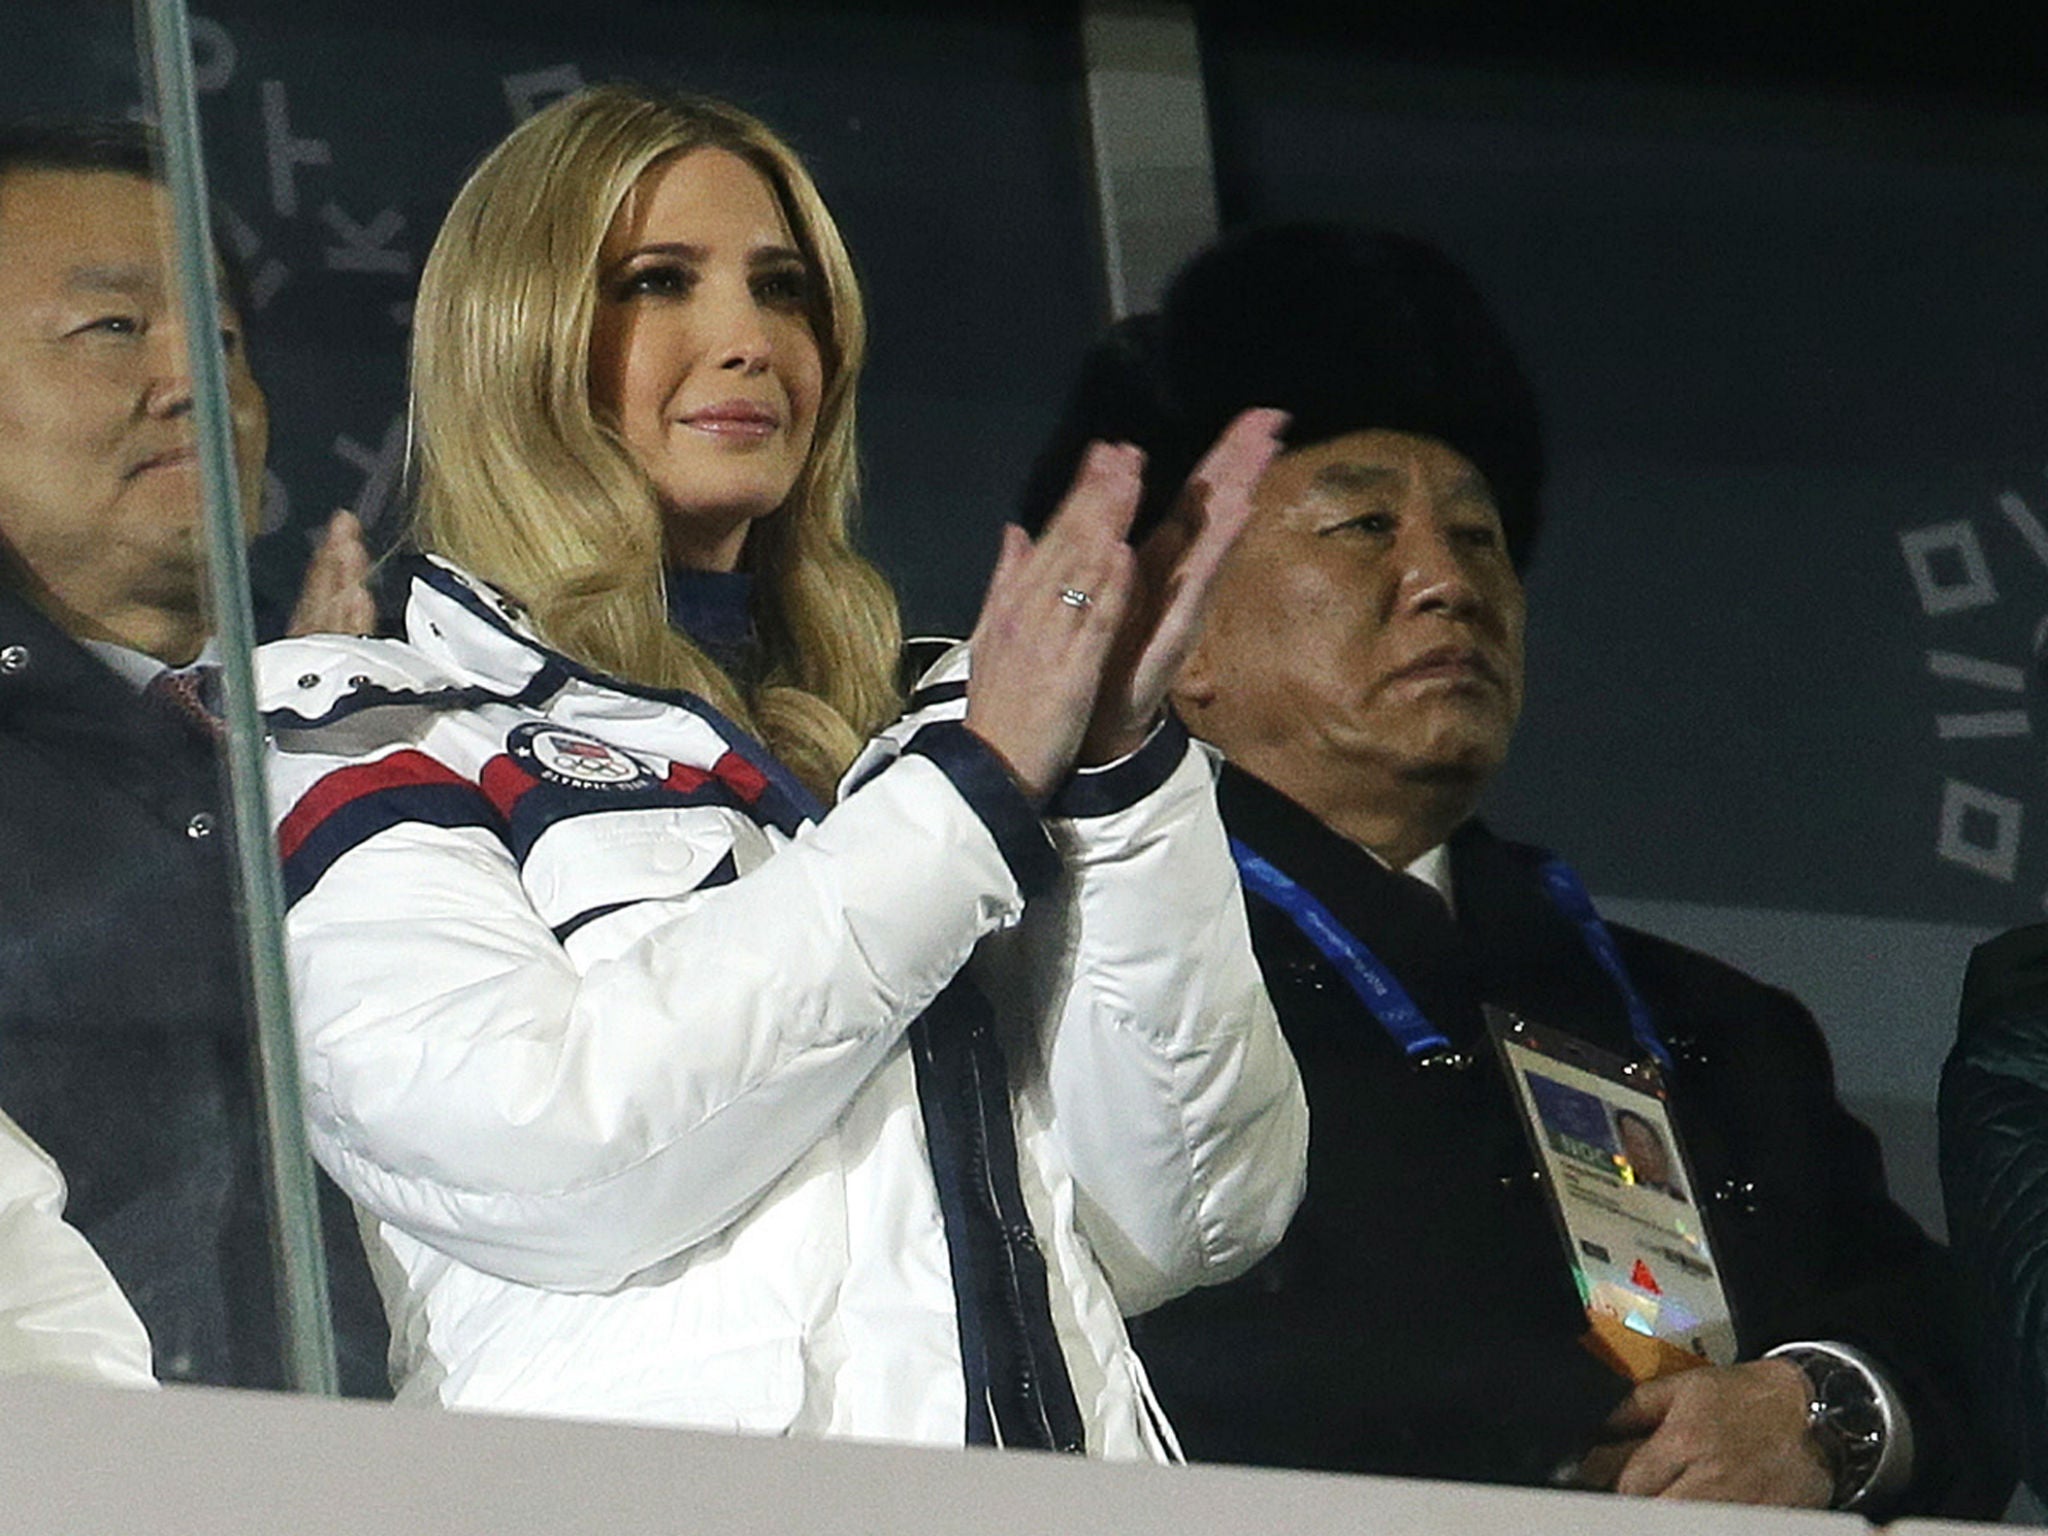 The President’s daughter attends the closing ceremony of the 2018 Winter Olympics with Kim Yong Chol, North Korea’s former military intelligence chief